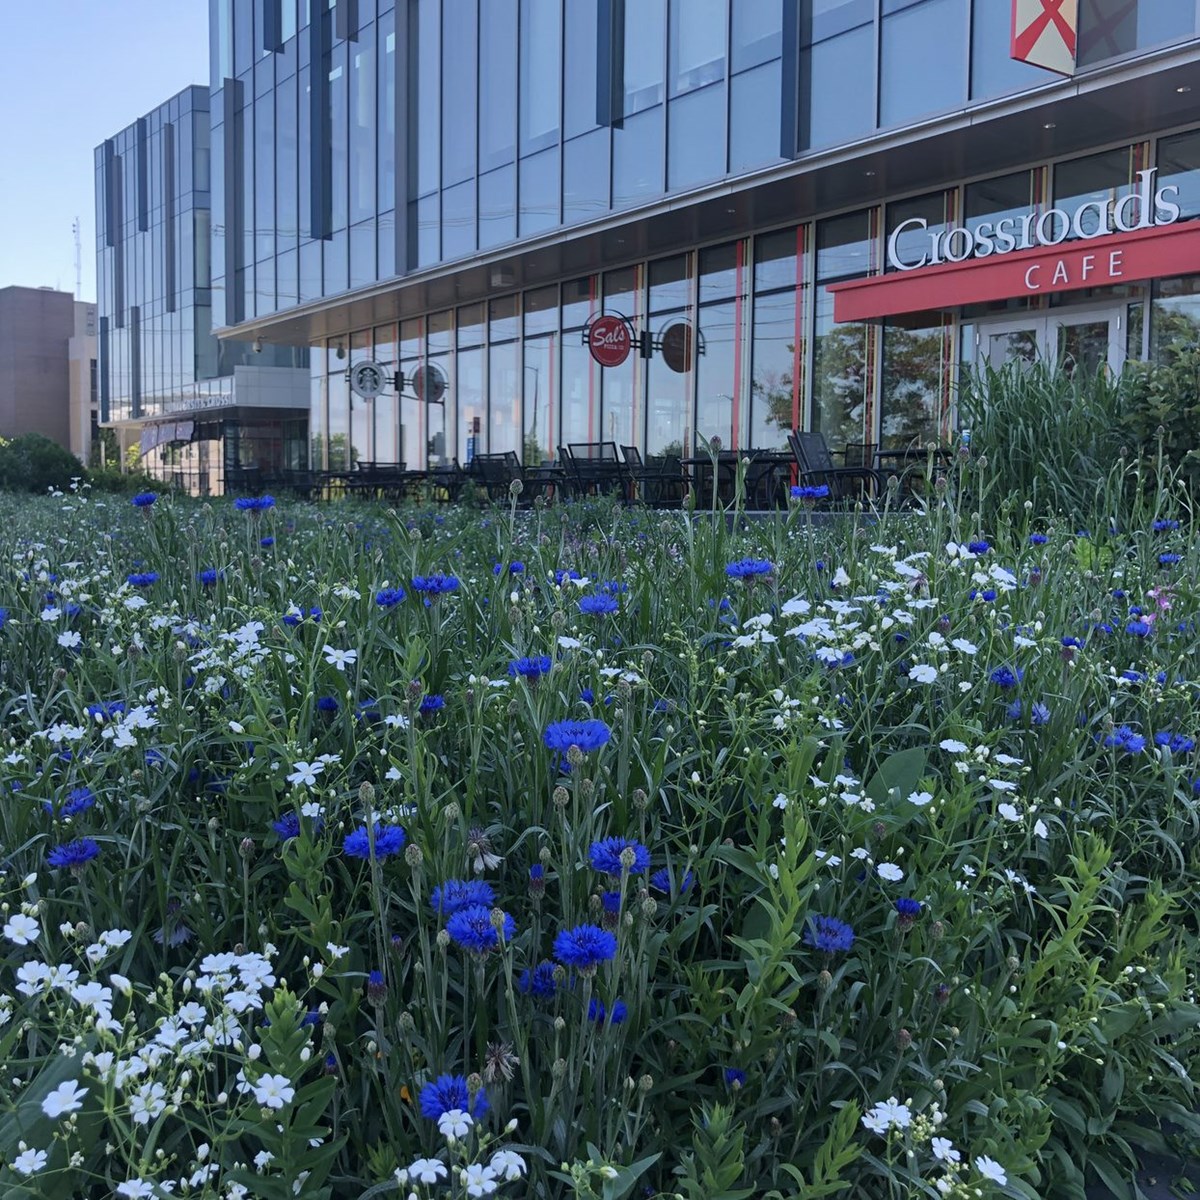 The image shows white and blue flowers, which are part of the pollinator garden. This in front of University Crossing, which features Crossroads Cafe and Sal's Pizza.